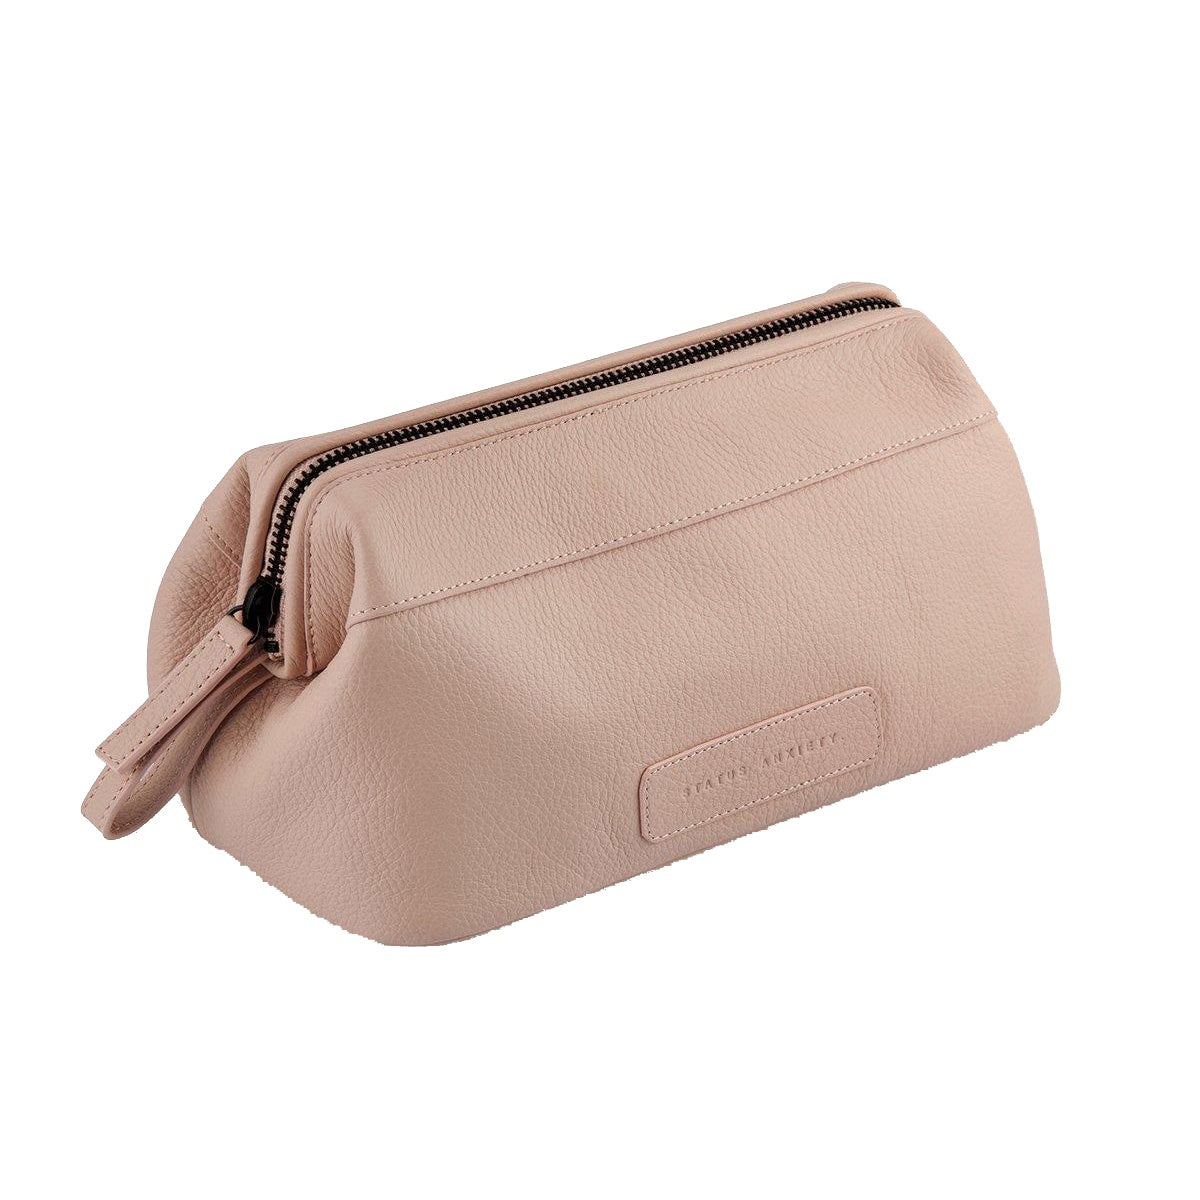 Status Anxiety leather toiletry bag pink